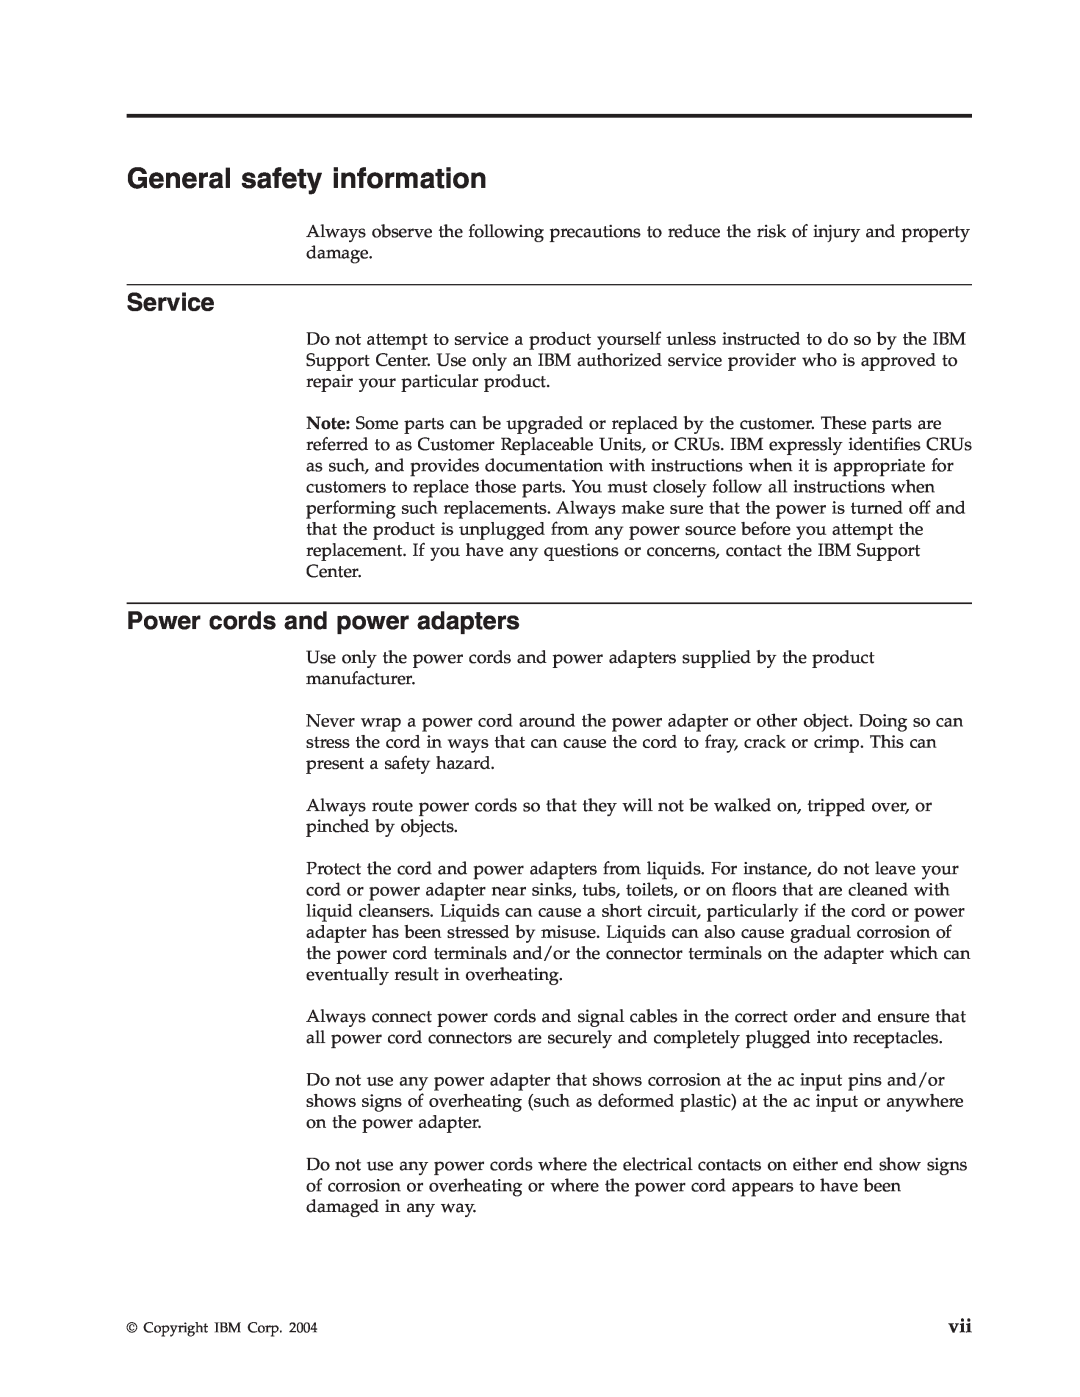 IBM Partner Pavilion PROJECTOR E400 manual General safety information, Service, Power cords and power adapters 